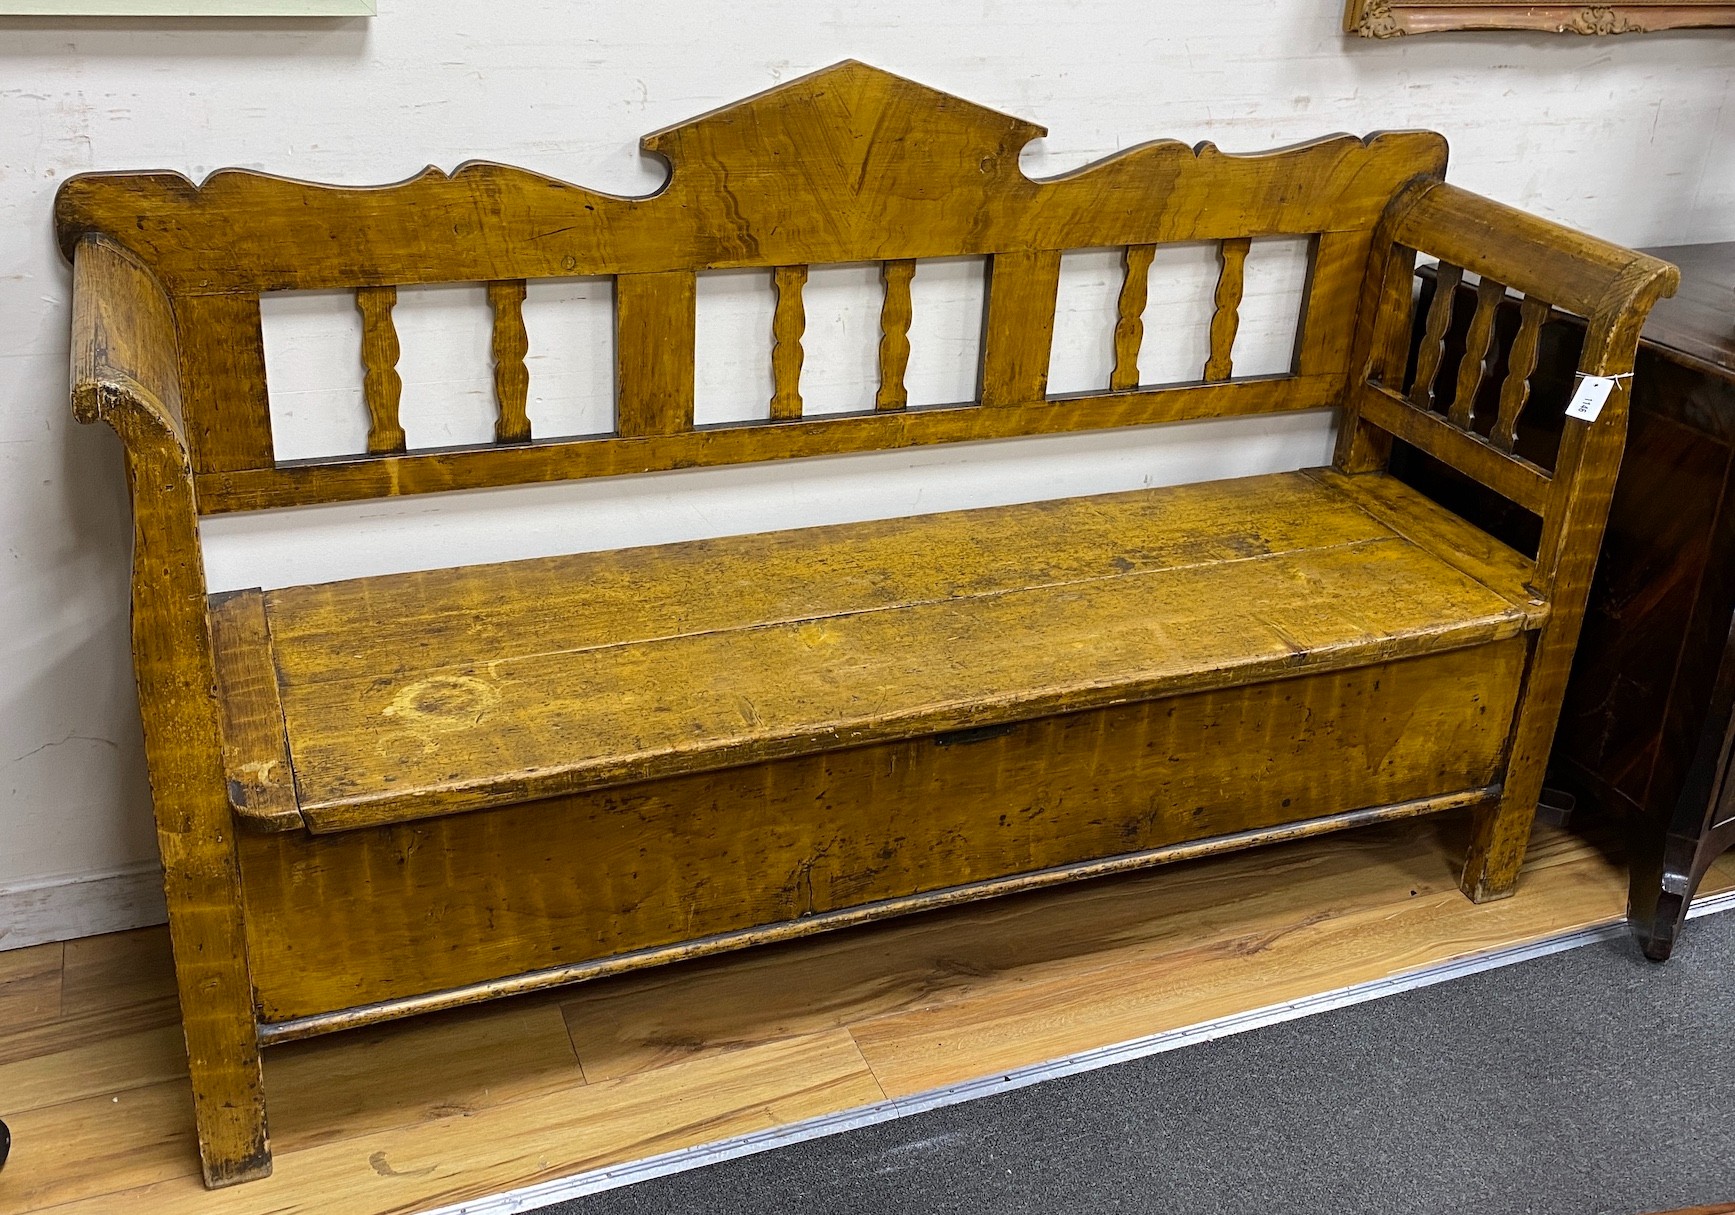 A 19th century Continental pine box seat settle with painted grain, width 190cm, depth 51cm, height 114cm